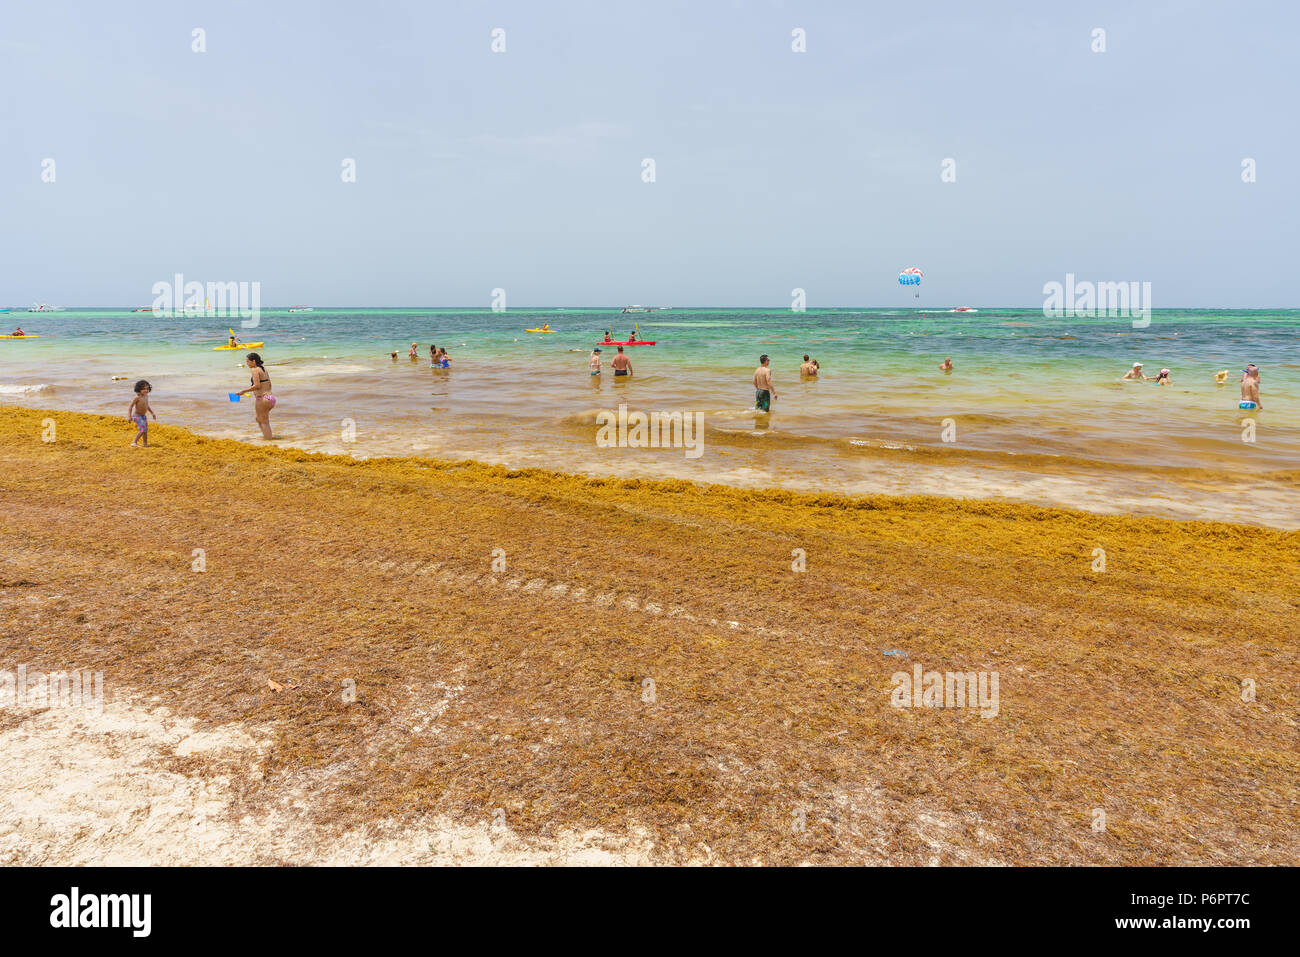 Punta Cana, Dominican Republic - June 24, 2018: sargassum seaweeds on the beaytiful ocean beach in Bavaro, Punta Cana, the result of global warming climate change. Stock Photo